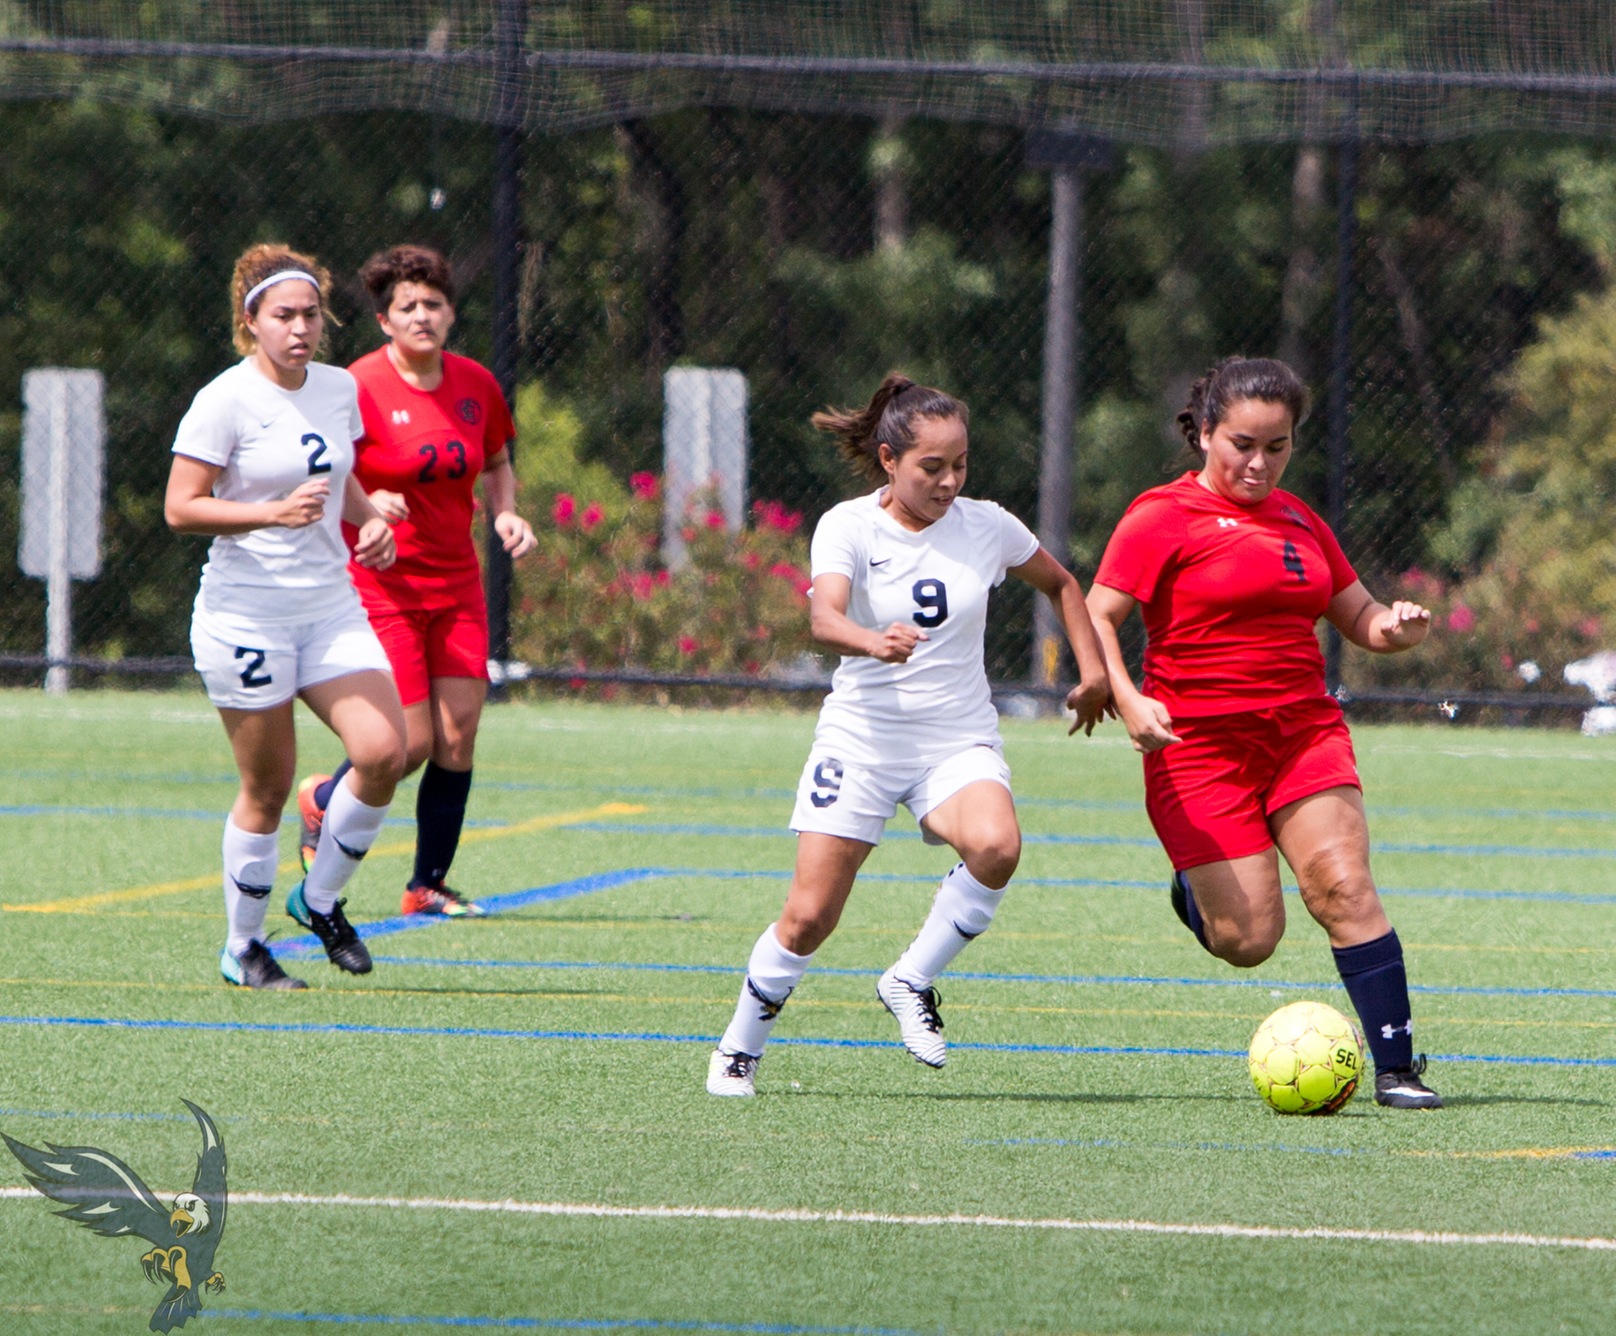 Women's Soccer Live Stats Available